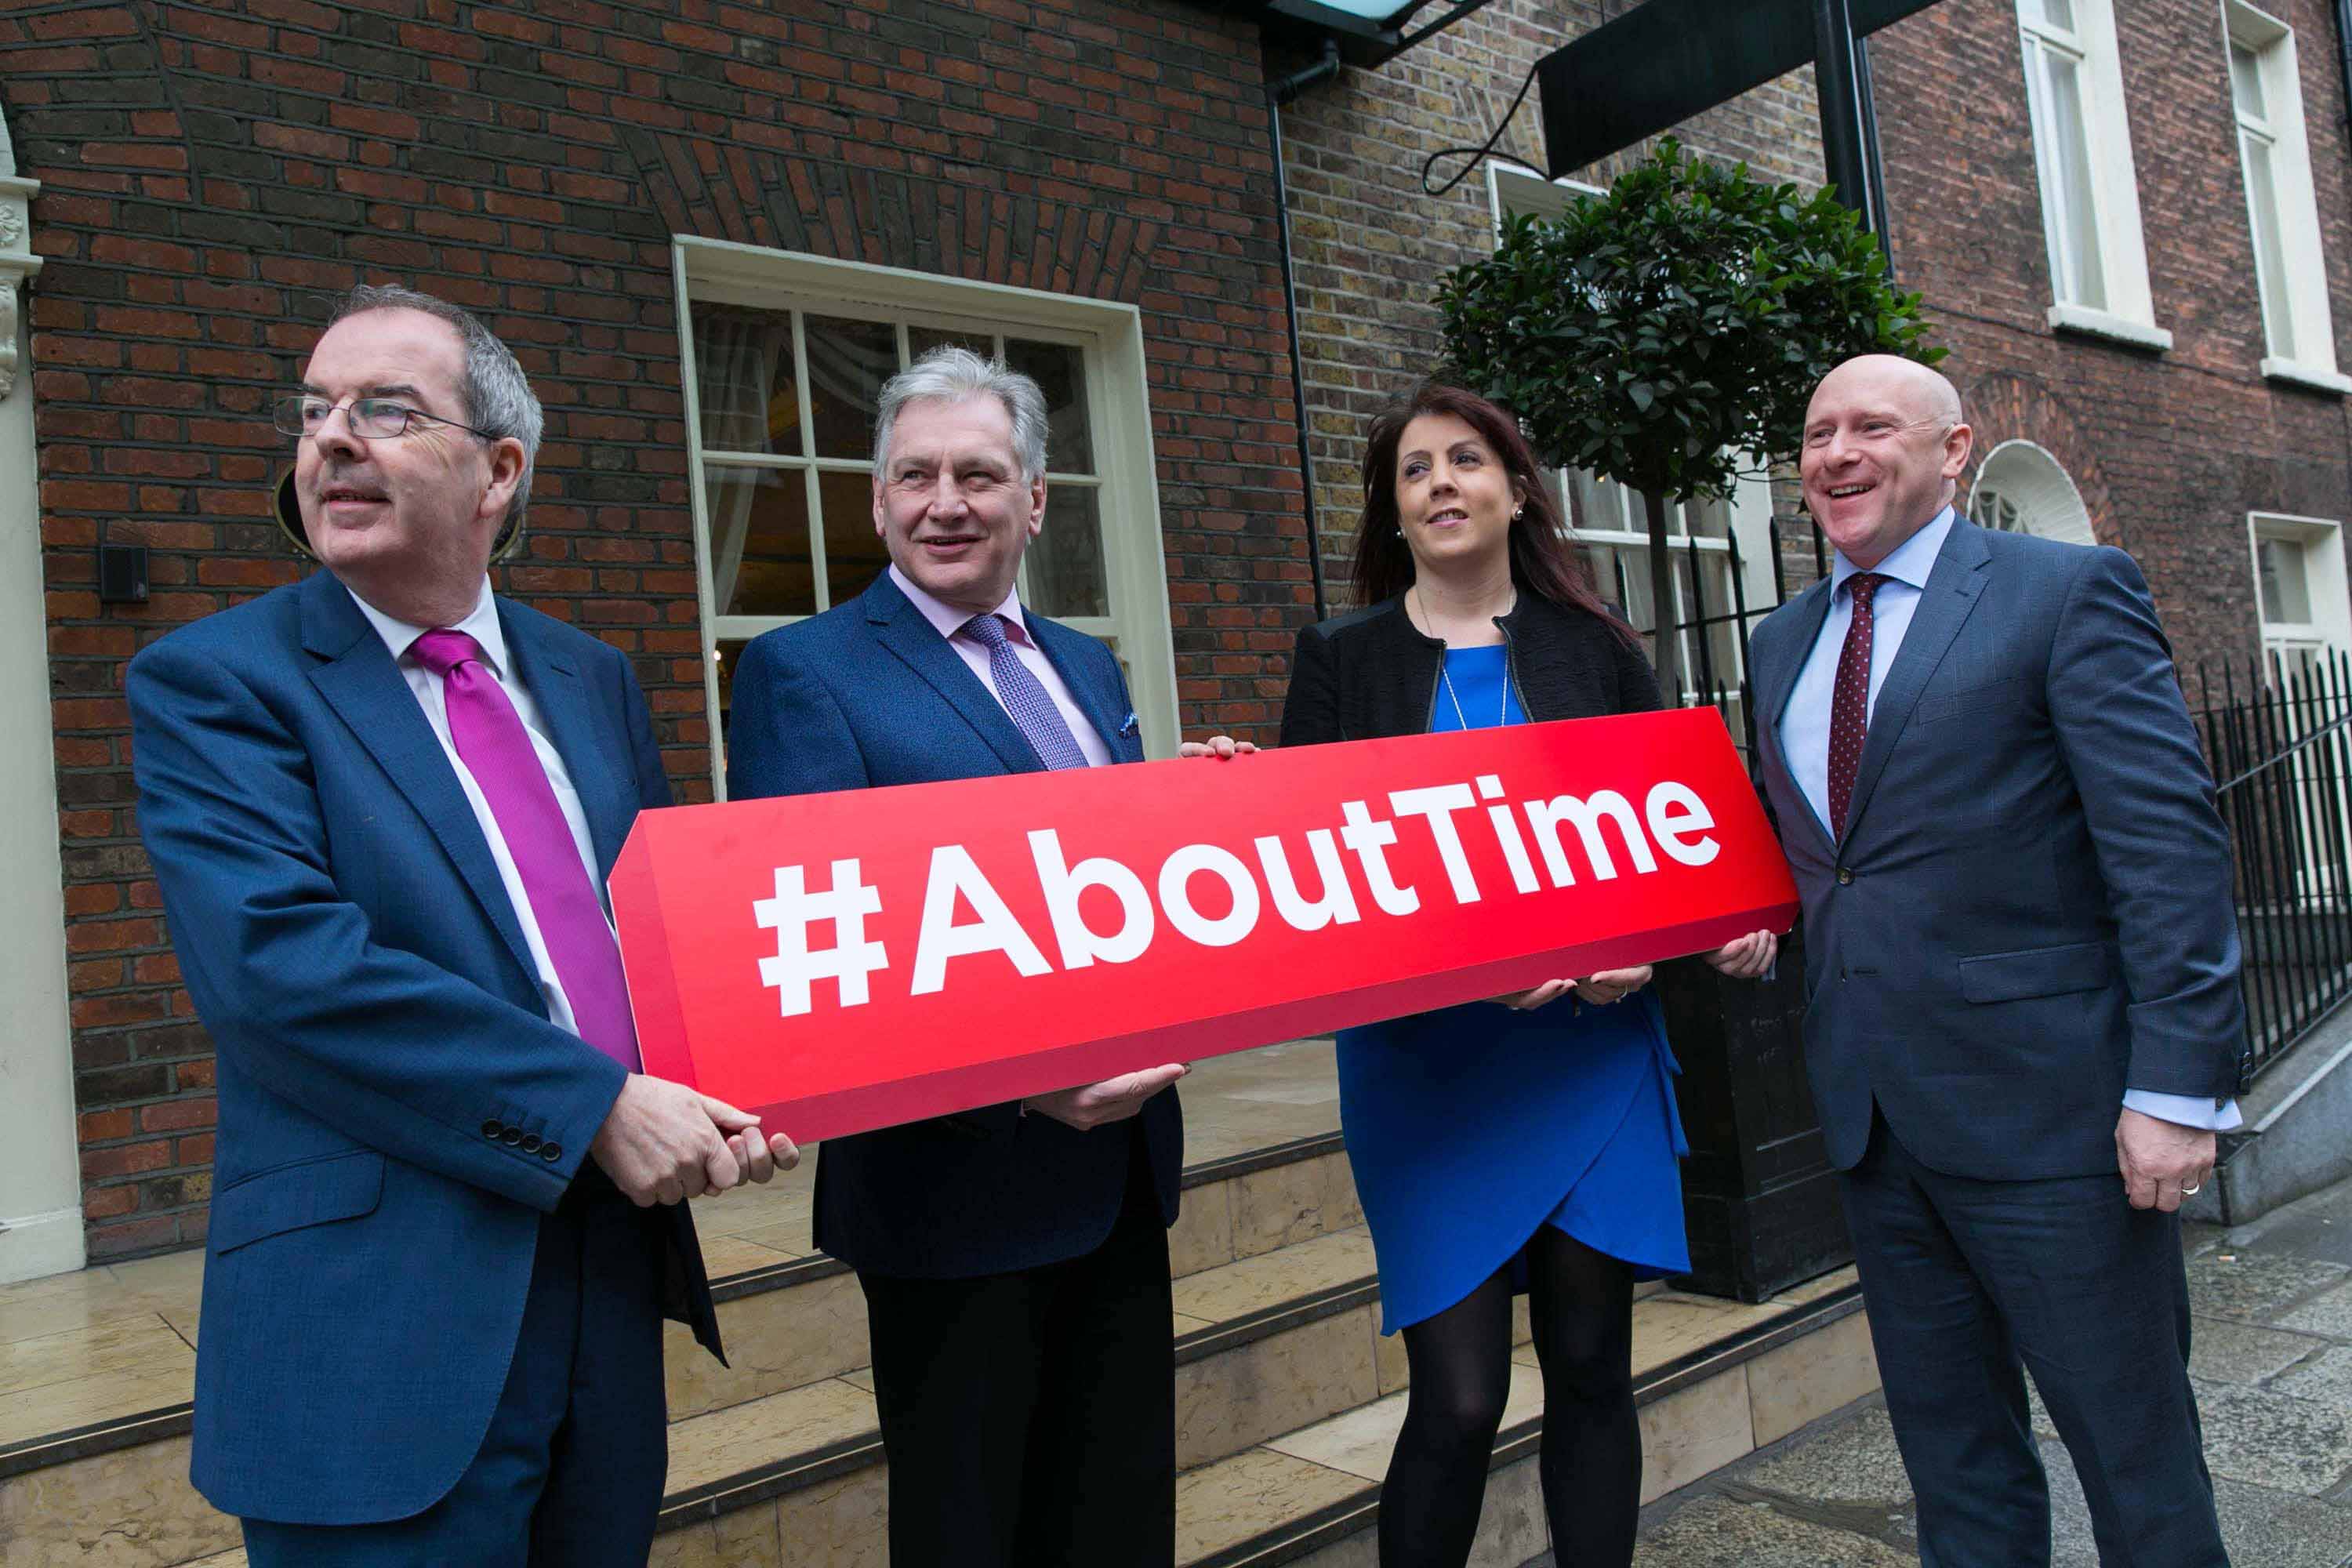 Both the LVA and VFI have been campaigning to overturn the ban on pubs opening on Good Friday for the past decade including the #AboutTime promotion which they launched in more recent times (from left): VFI Chief Executive Padraig Cribben, VFI President Pat Crotty, former LVA Chair Deirdre Devitt and LVA Chief Executive Donall O’Keeffe.